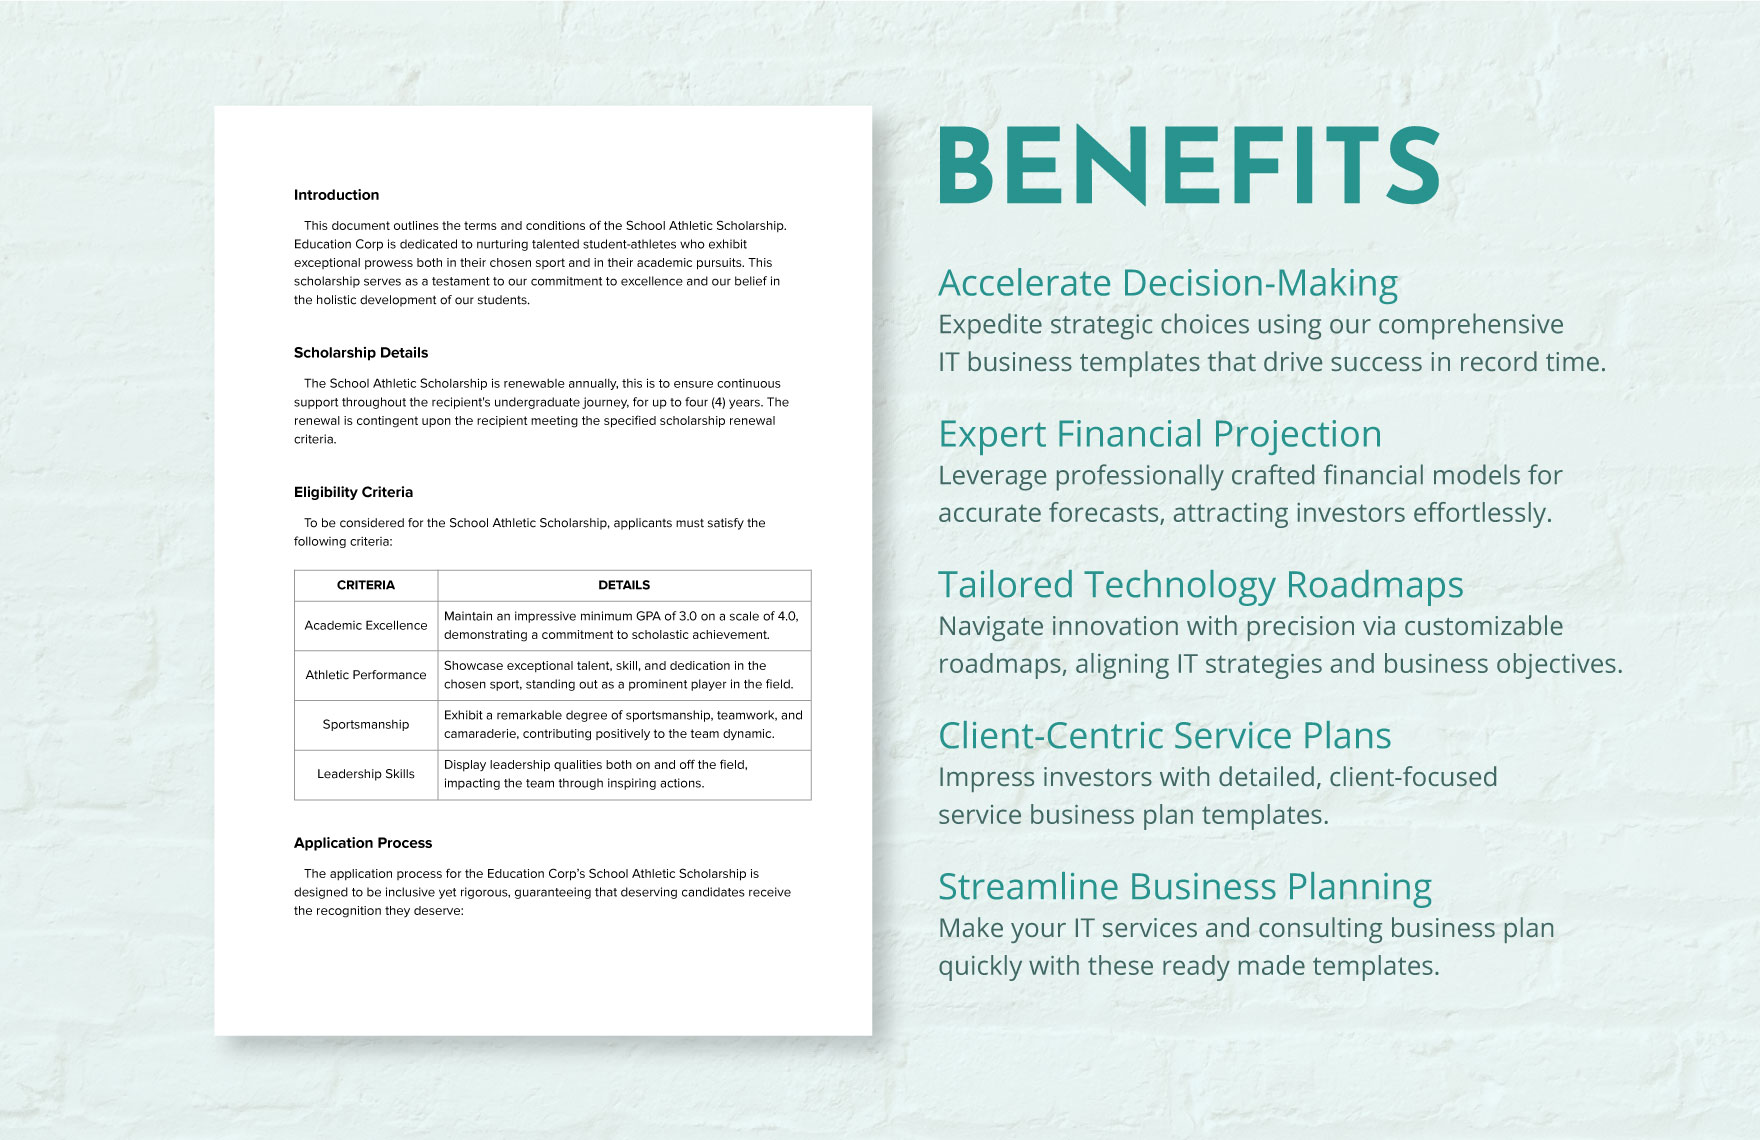 IoT (Internet of Things) Consulting Business Plan Template